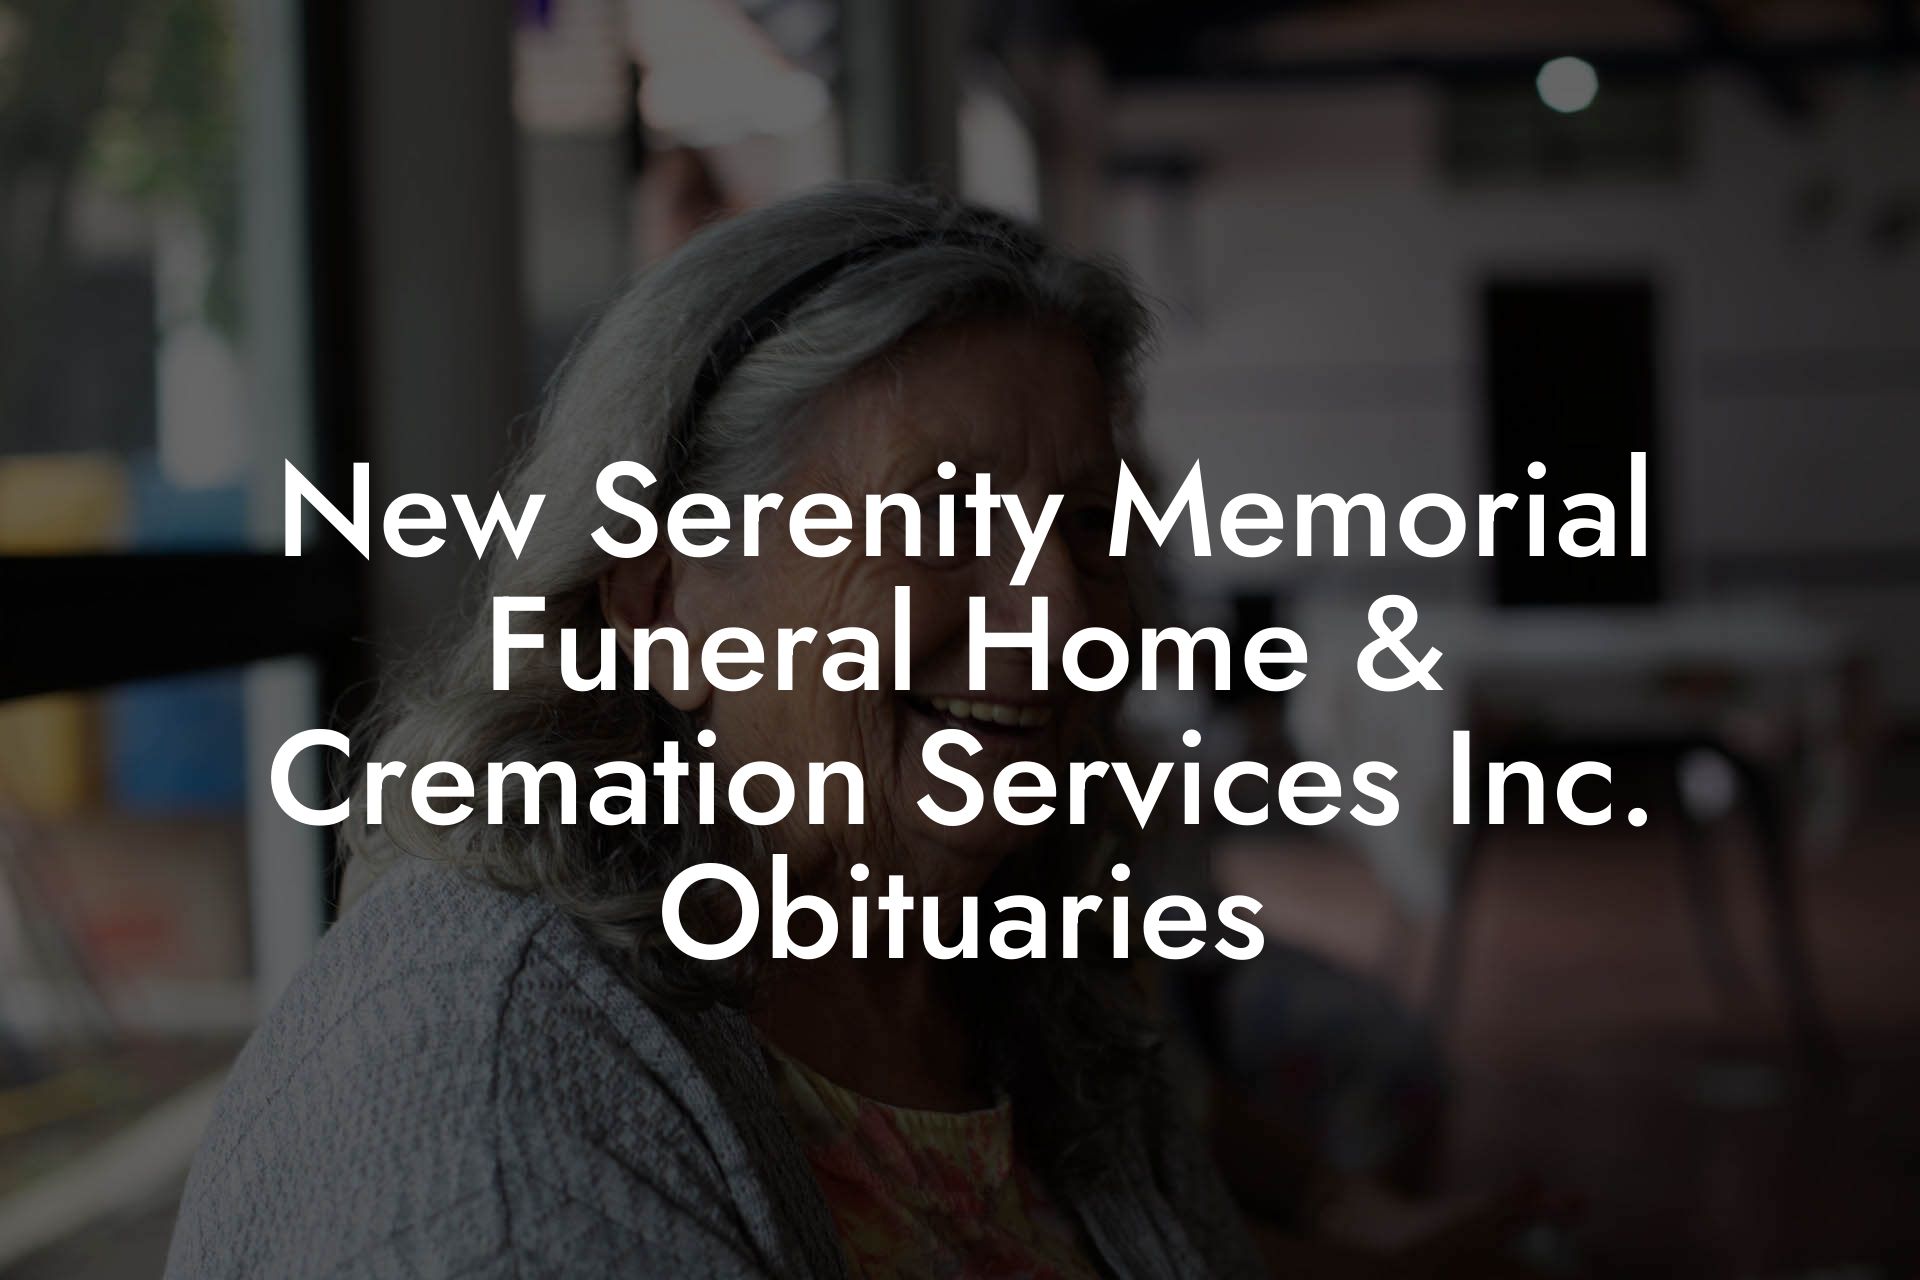 New Serenity Memorial Funeral Home & Cremation Services Inc. Obituaries